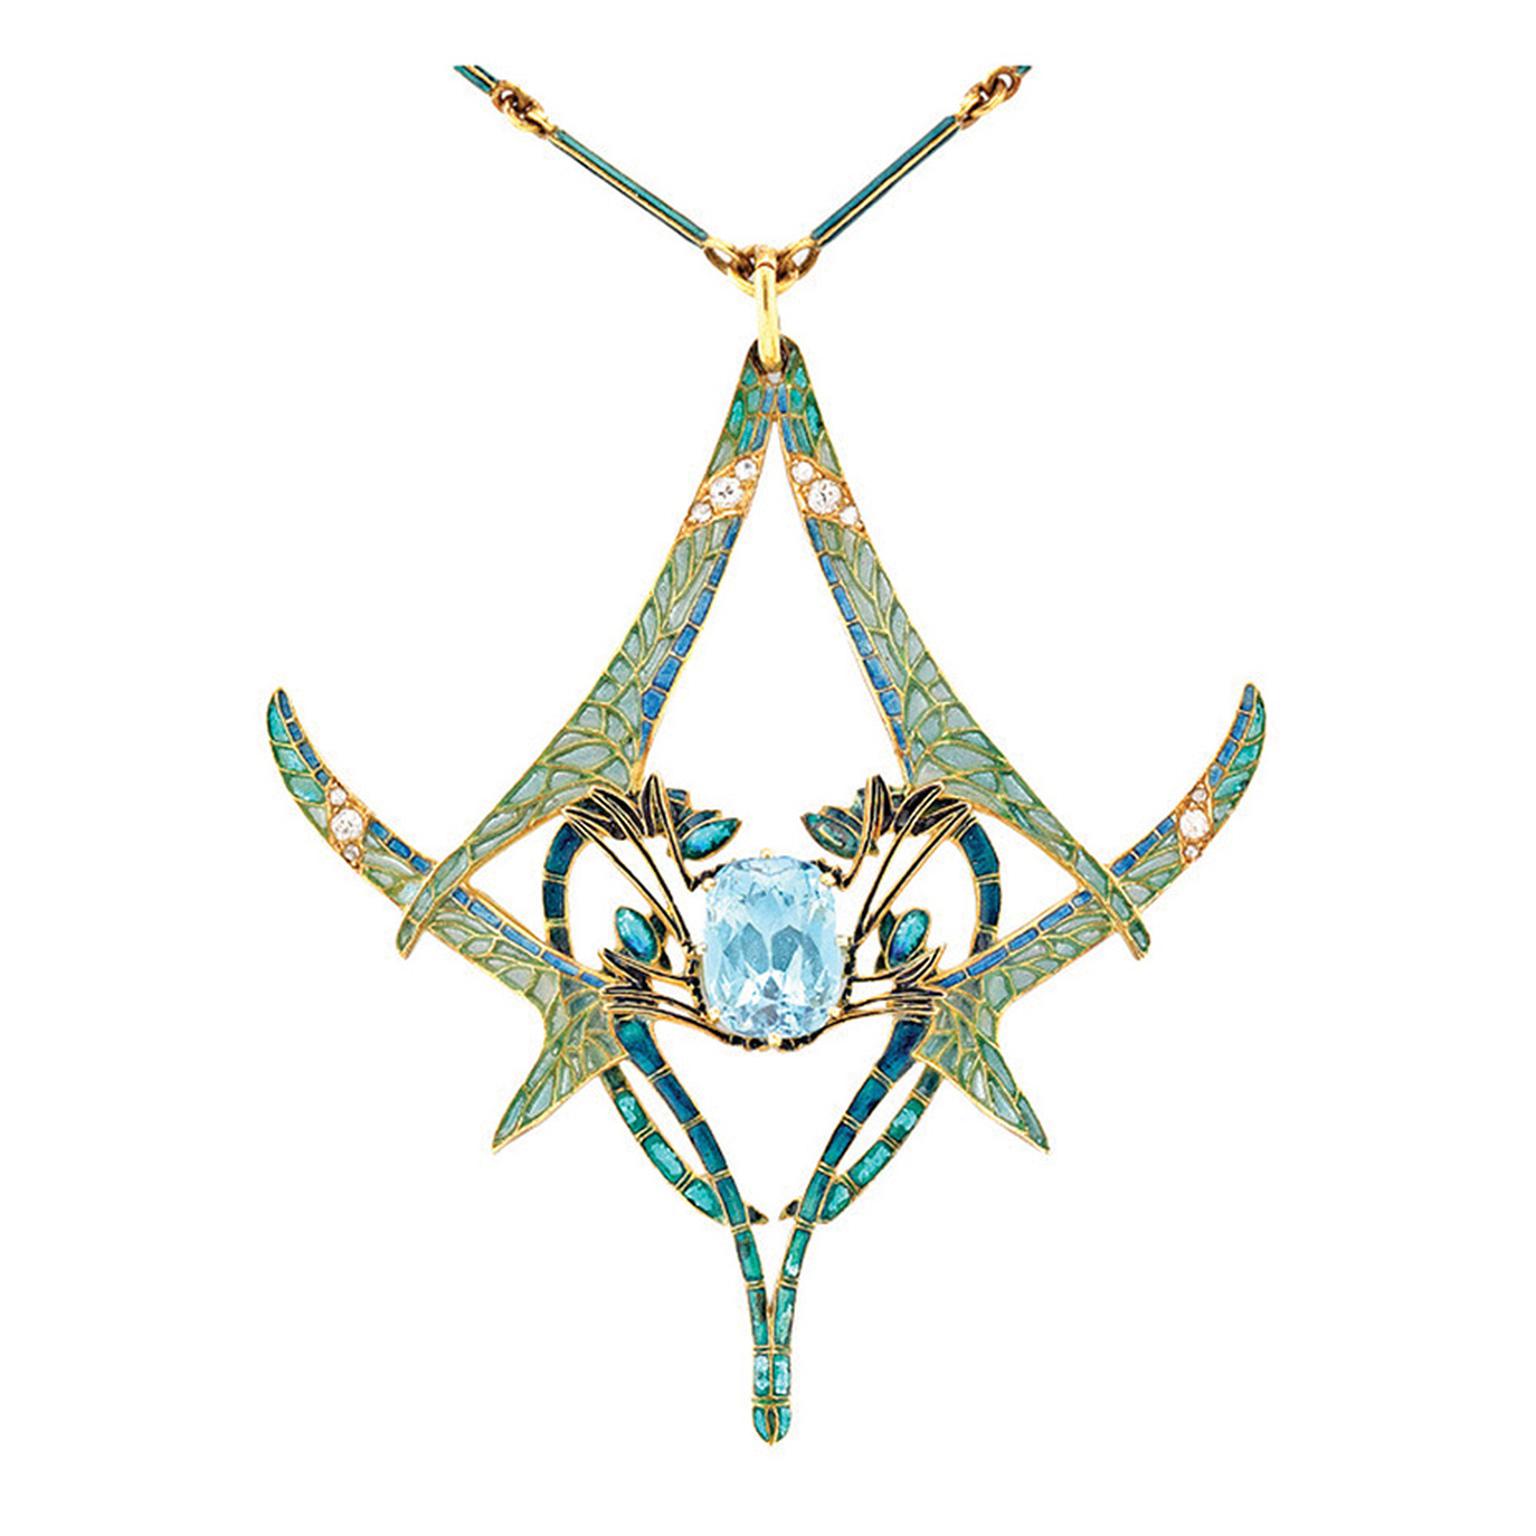 Important René Lalique dragonfly aquamarine pendant with plique-à-jour enamel wings, embellished with circular- and rose-cut diamonds.